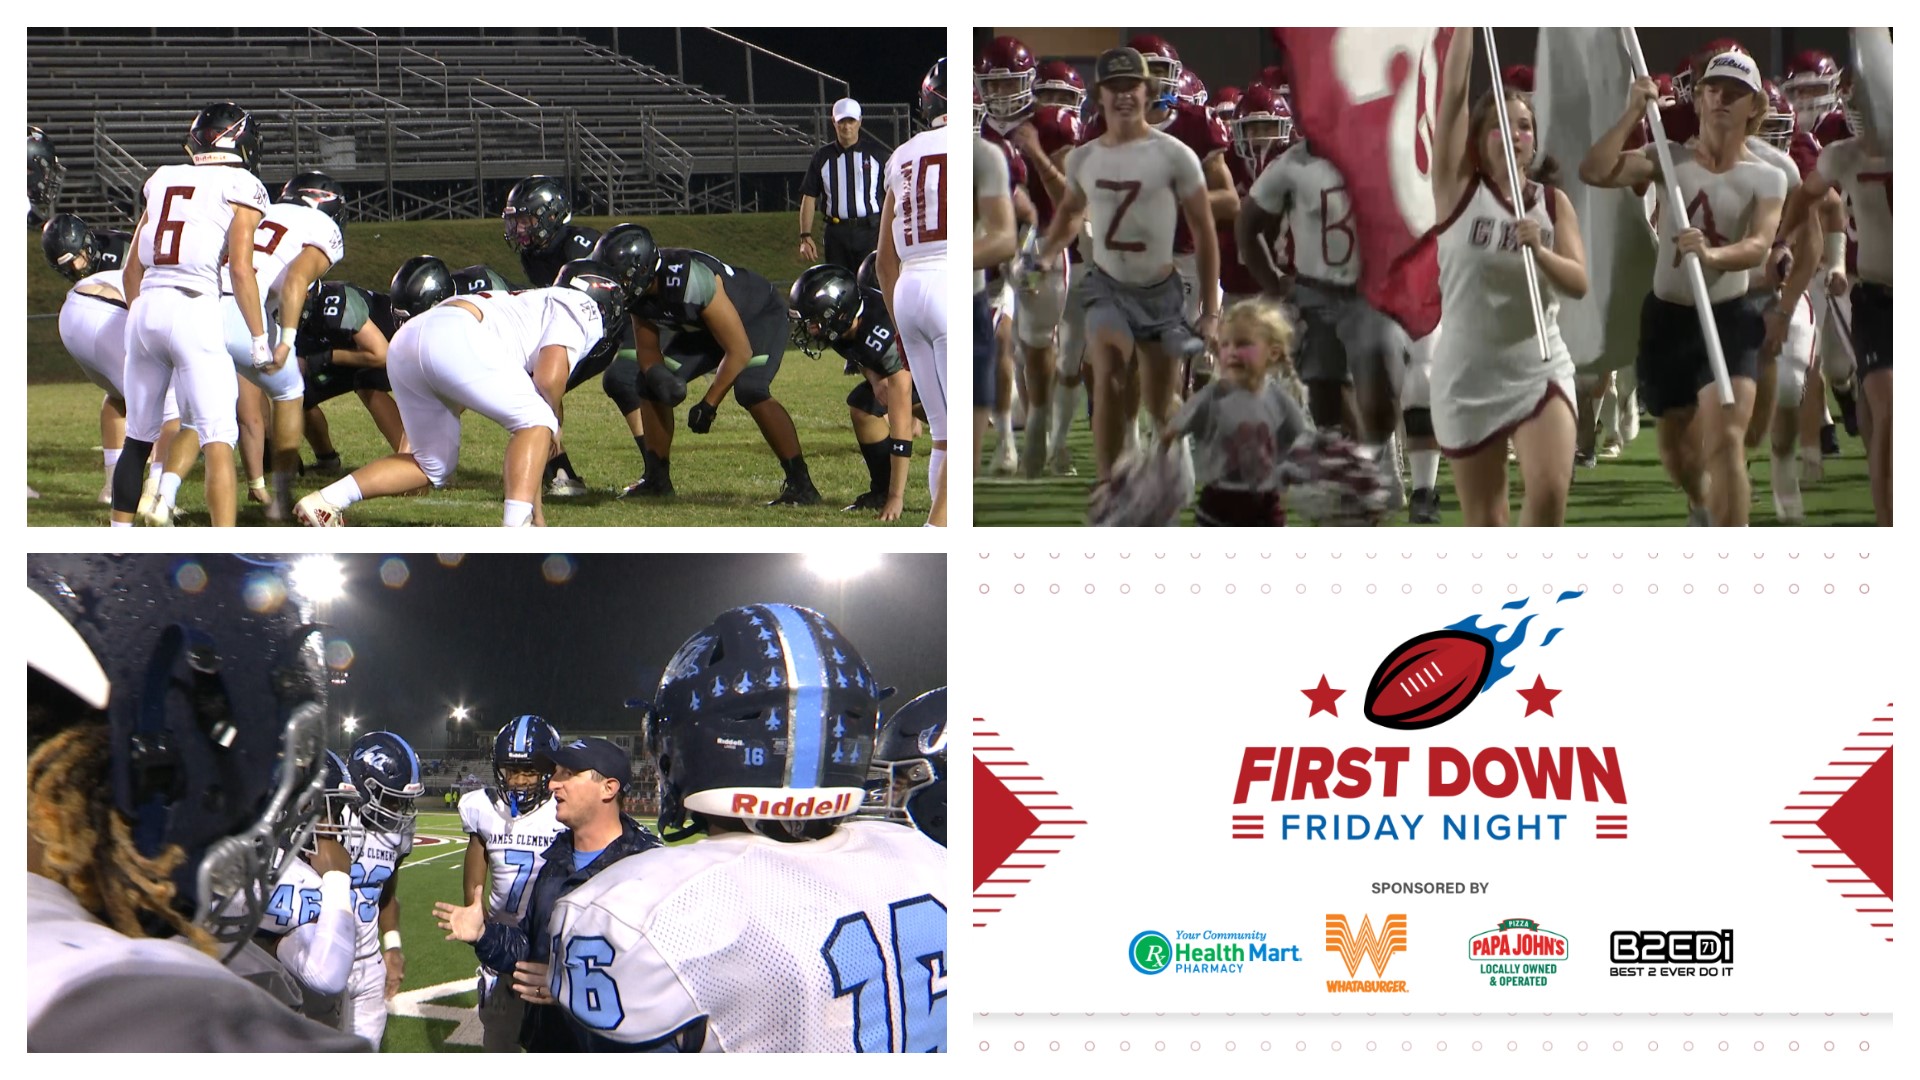 More region champions were crowned across the state & throughout the Tennessee Valley. We've got highlights from those games and many more on First Down Friday Night